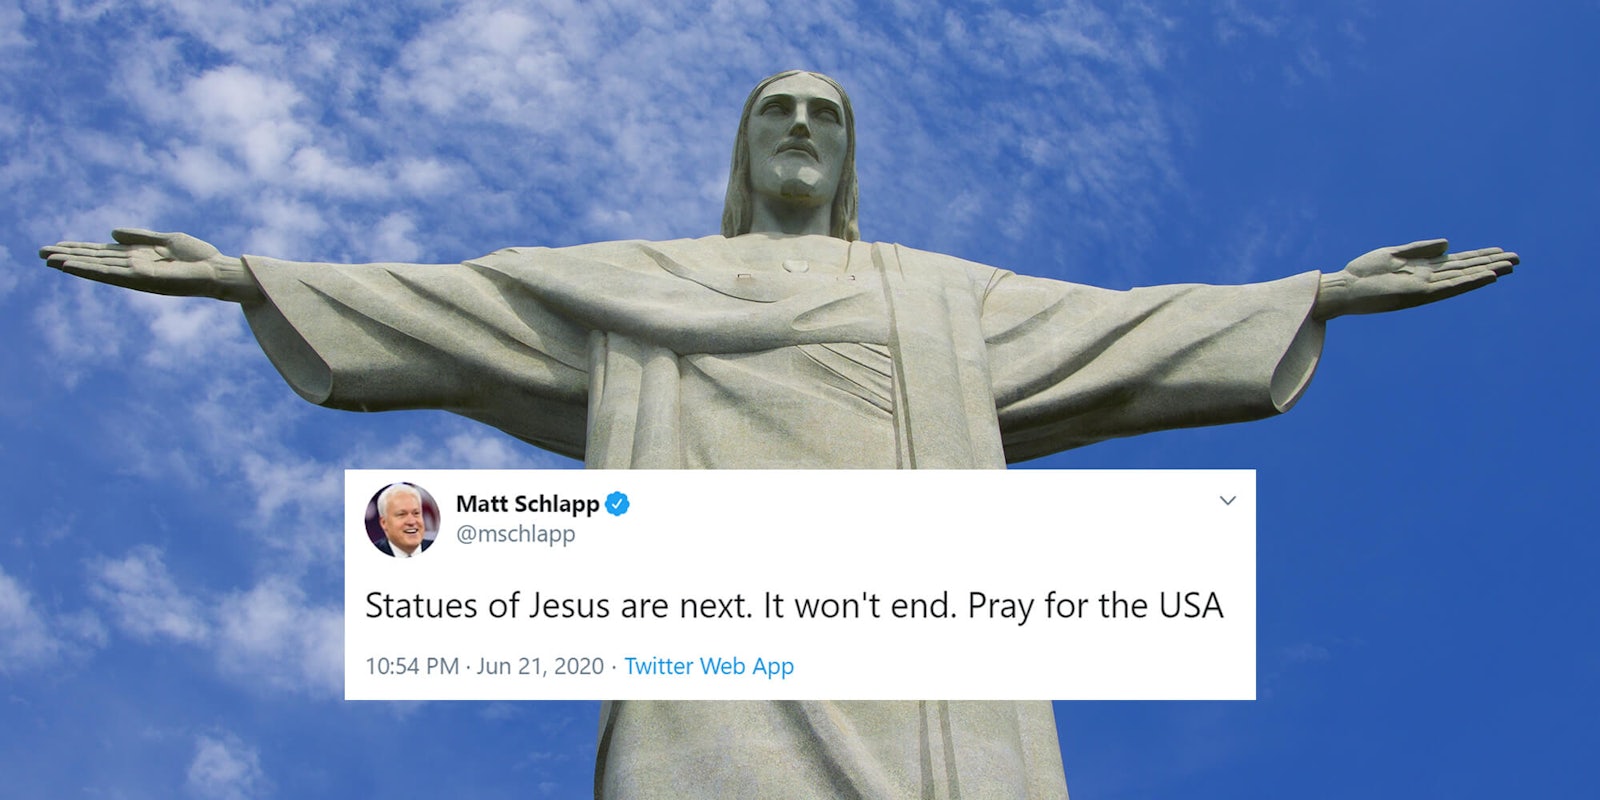 Christ the Redeemer statue with Matt Schlapp tweet 'Statues of Jesus are next. It won't end. Pray for the USA'